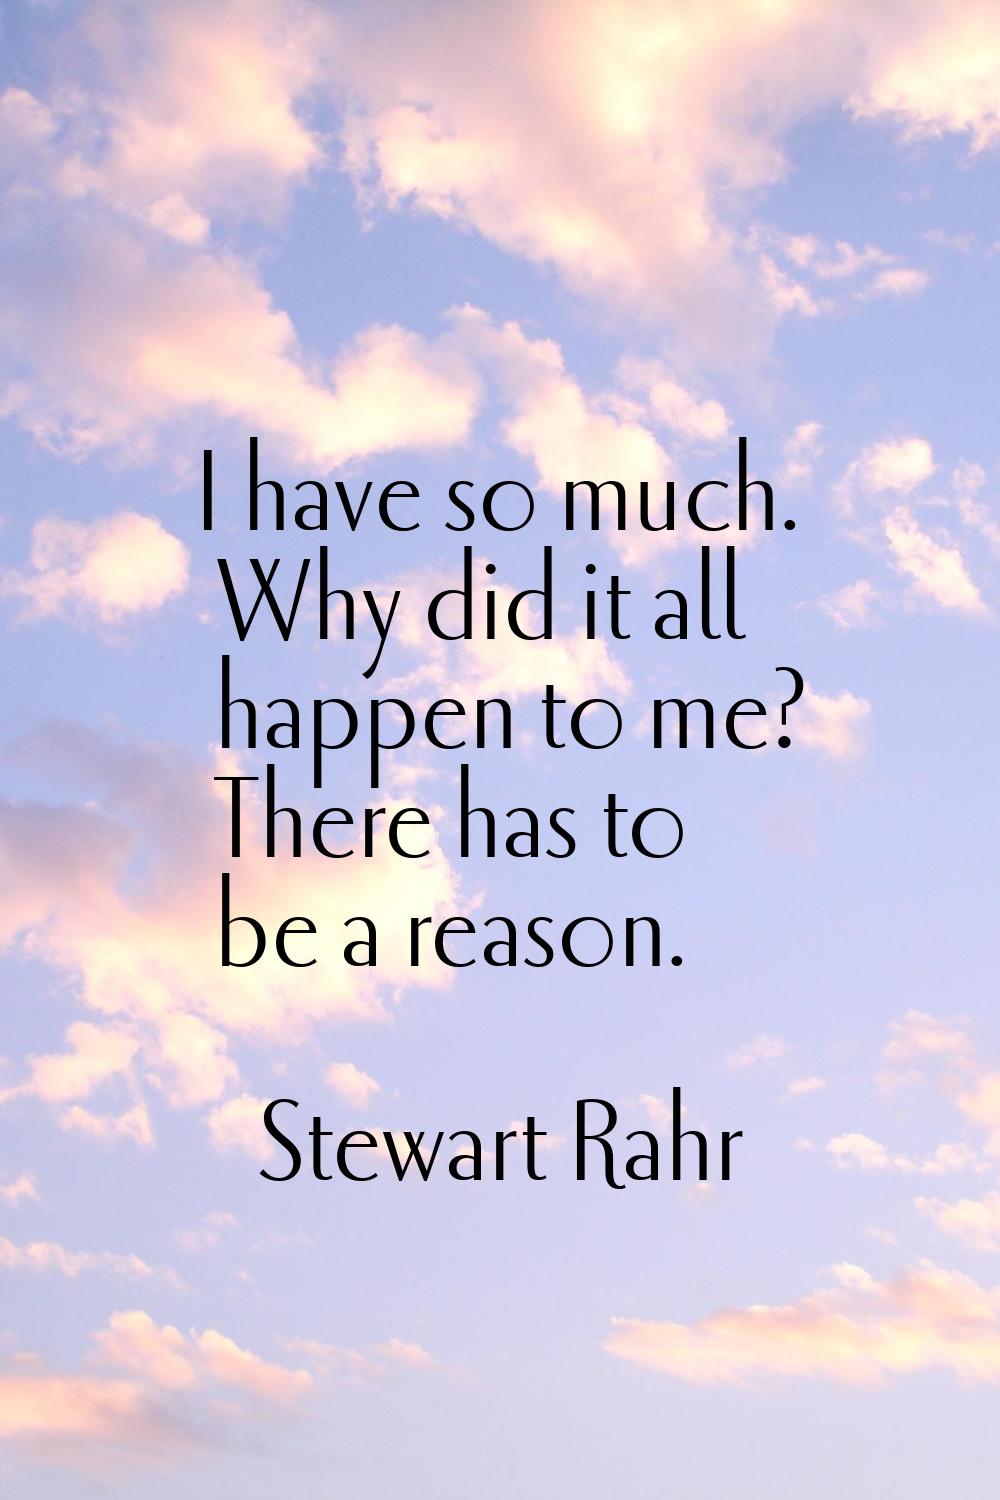 I have so much. Why did it all happen to me? There has to be a reason.